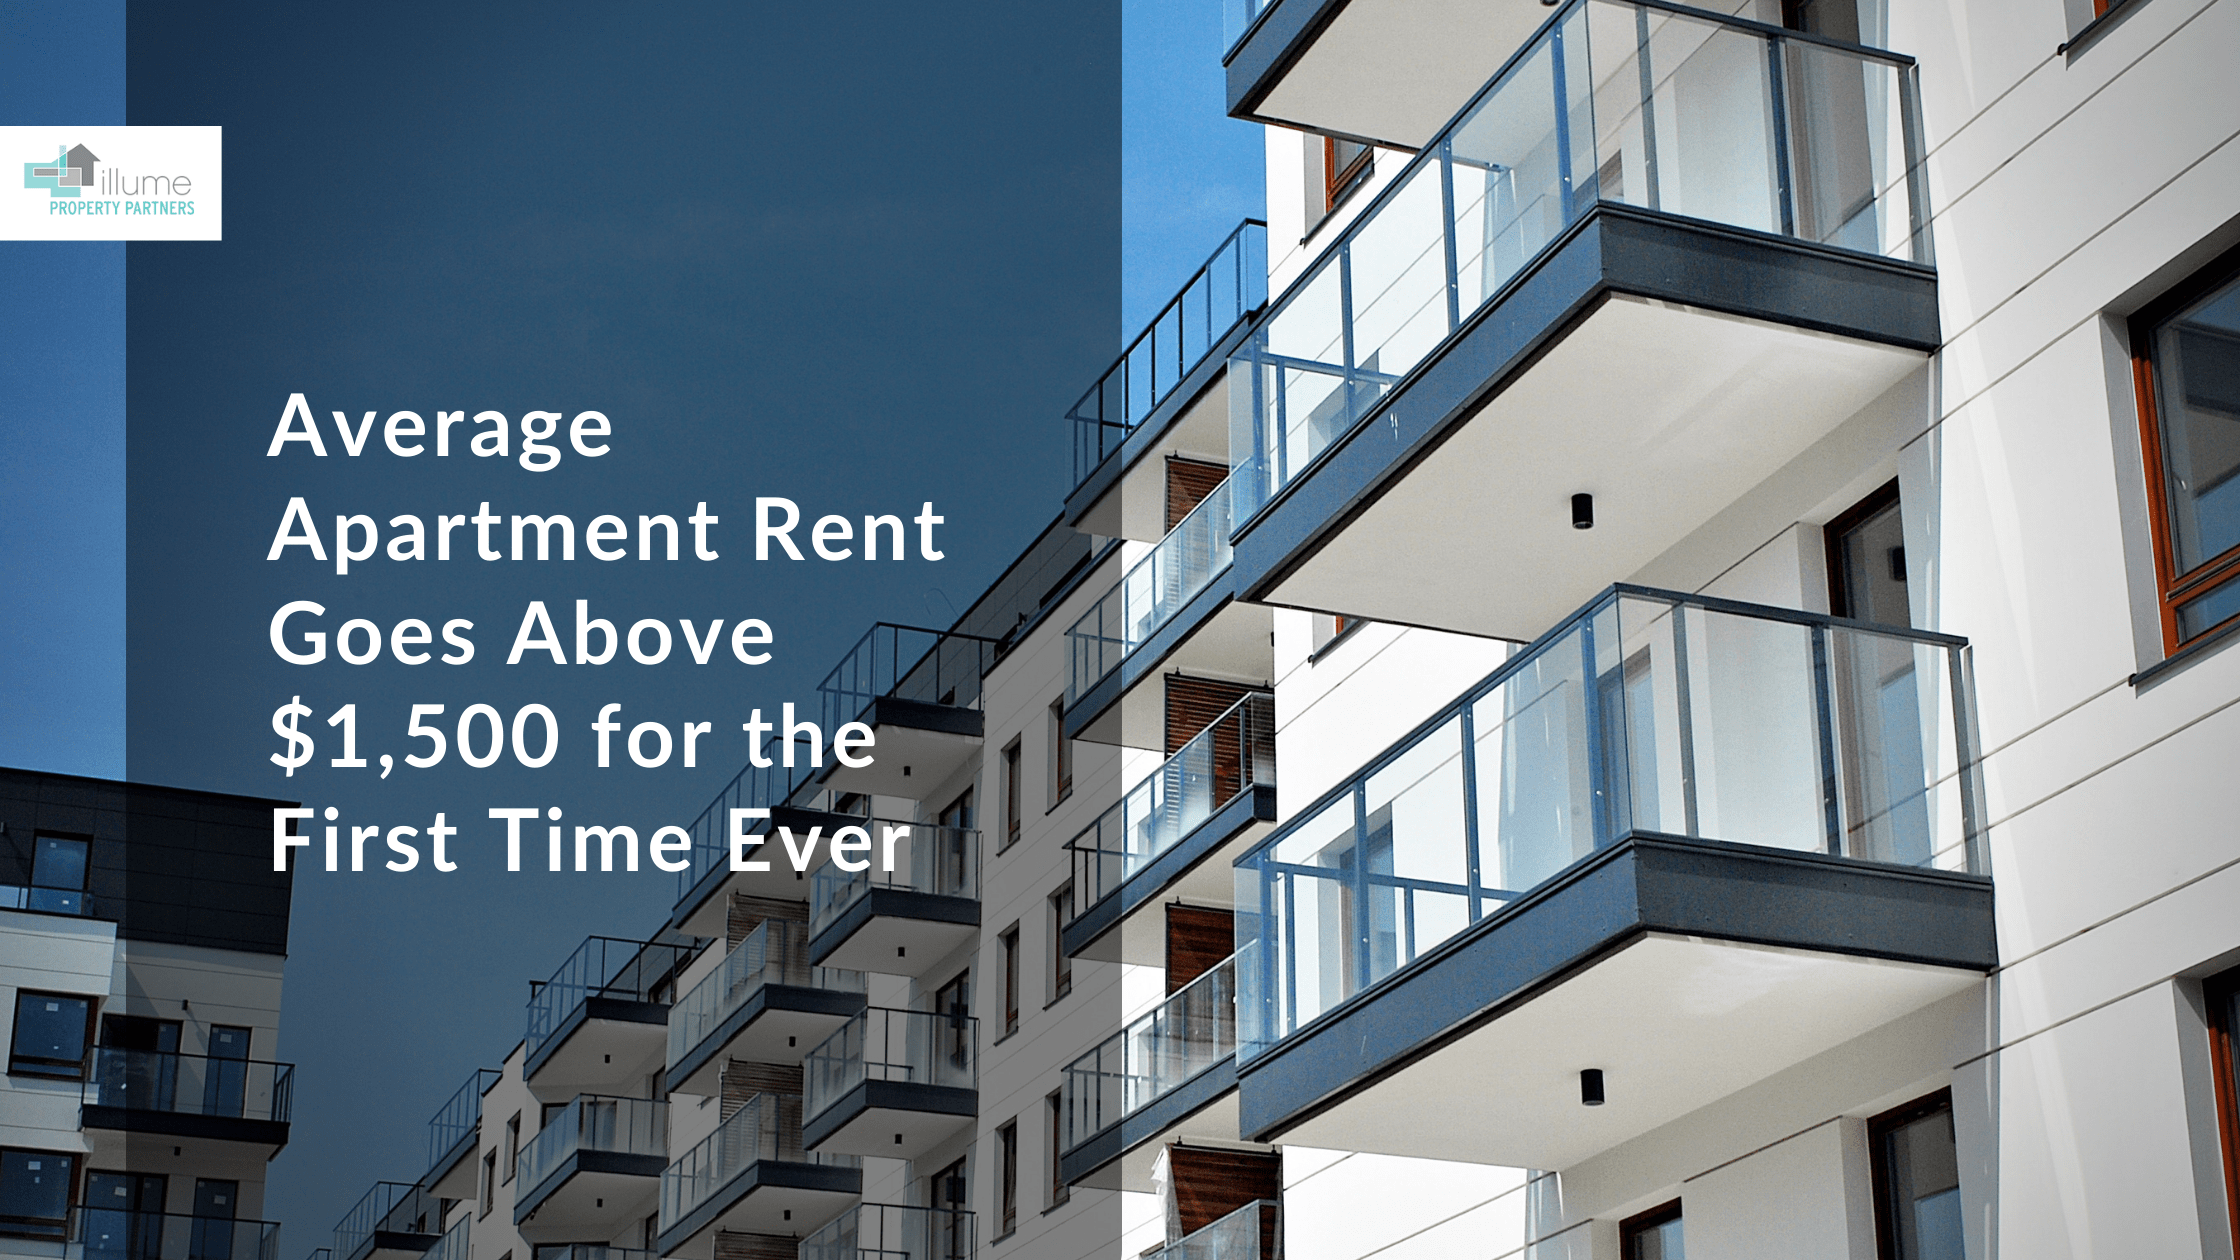 Average Apartment Rent Goes Above $1,500 for the First Time Ever